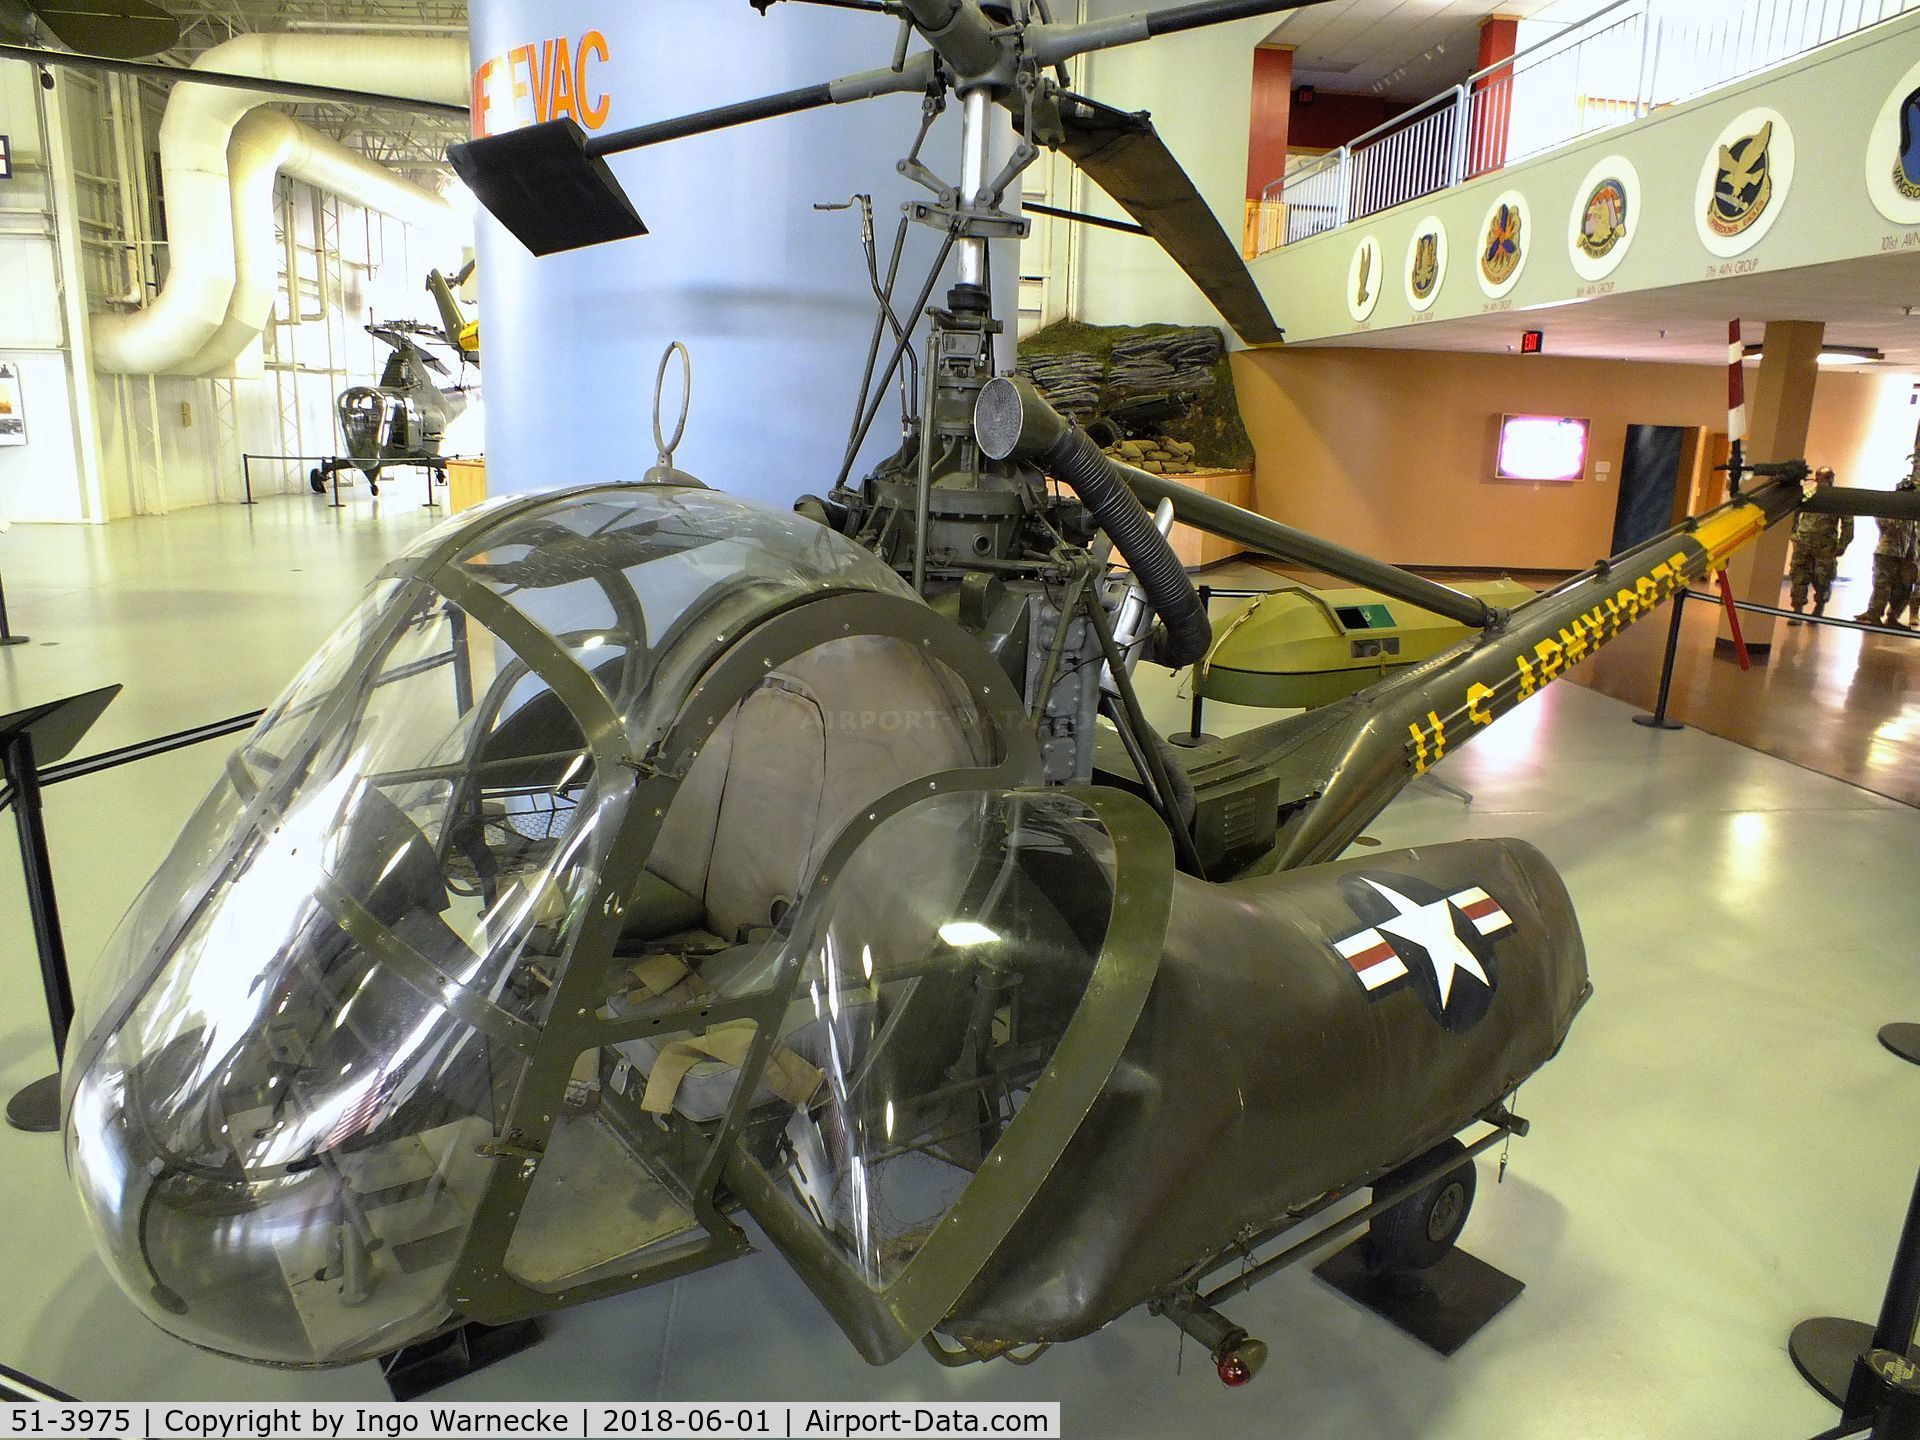 51-3975, 1951 Hiller UH-23B Raven C/N 188, Hiller UH-23B Raven at the US Army Aviation Museum, Ft. Rucker